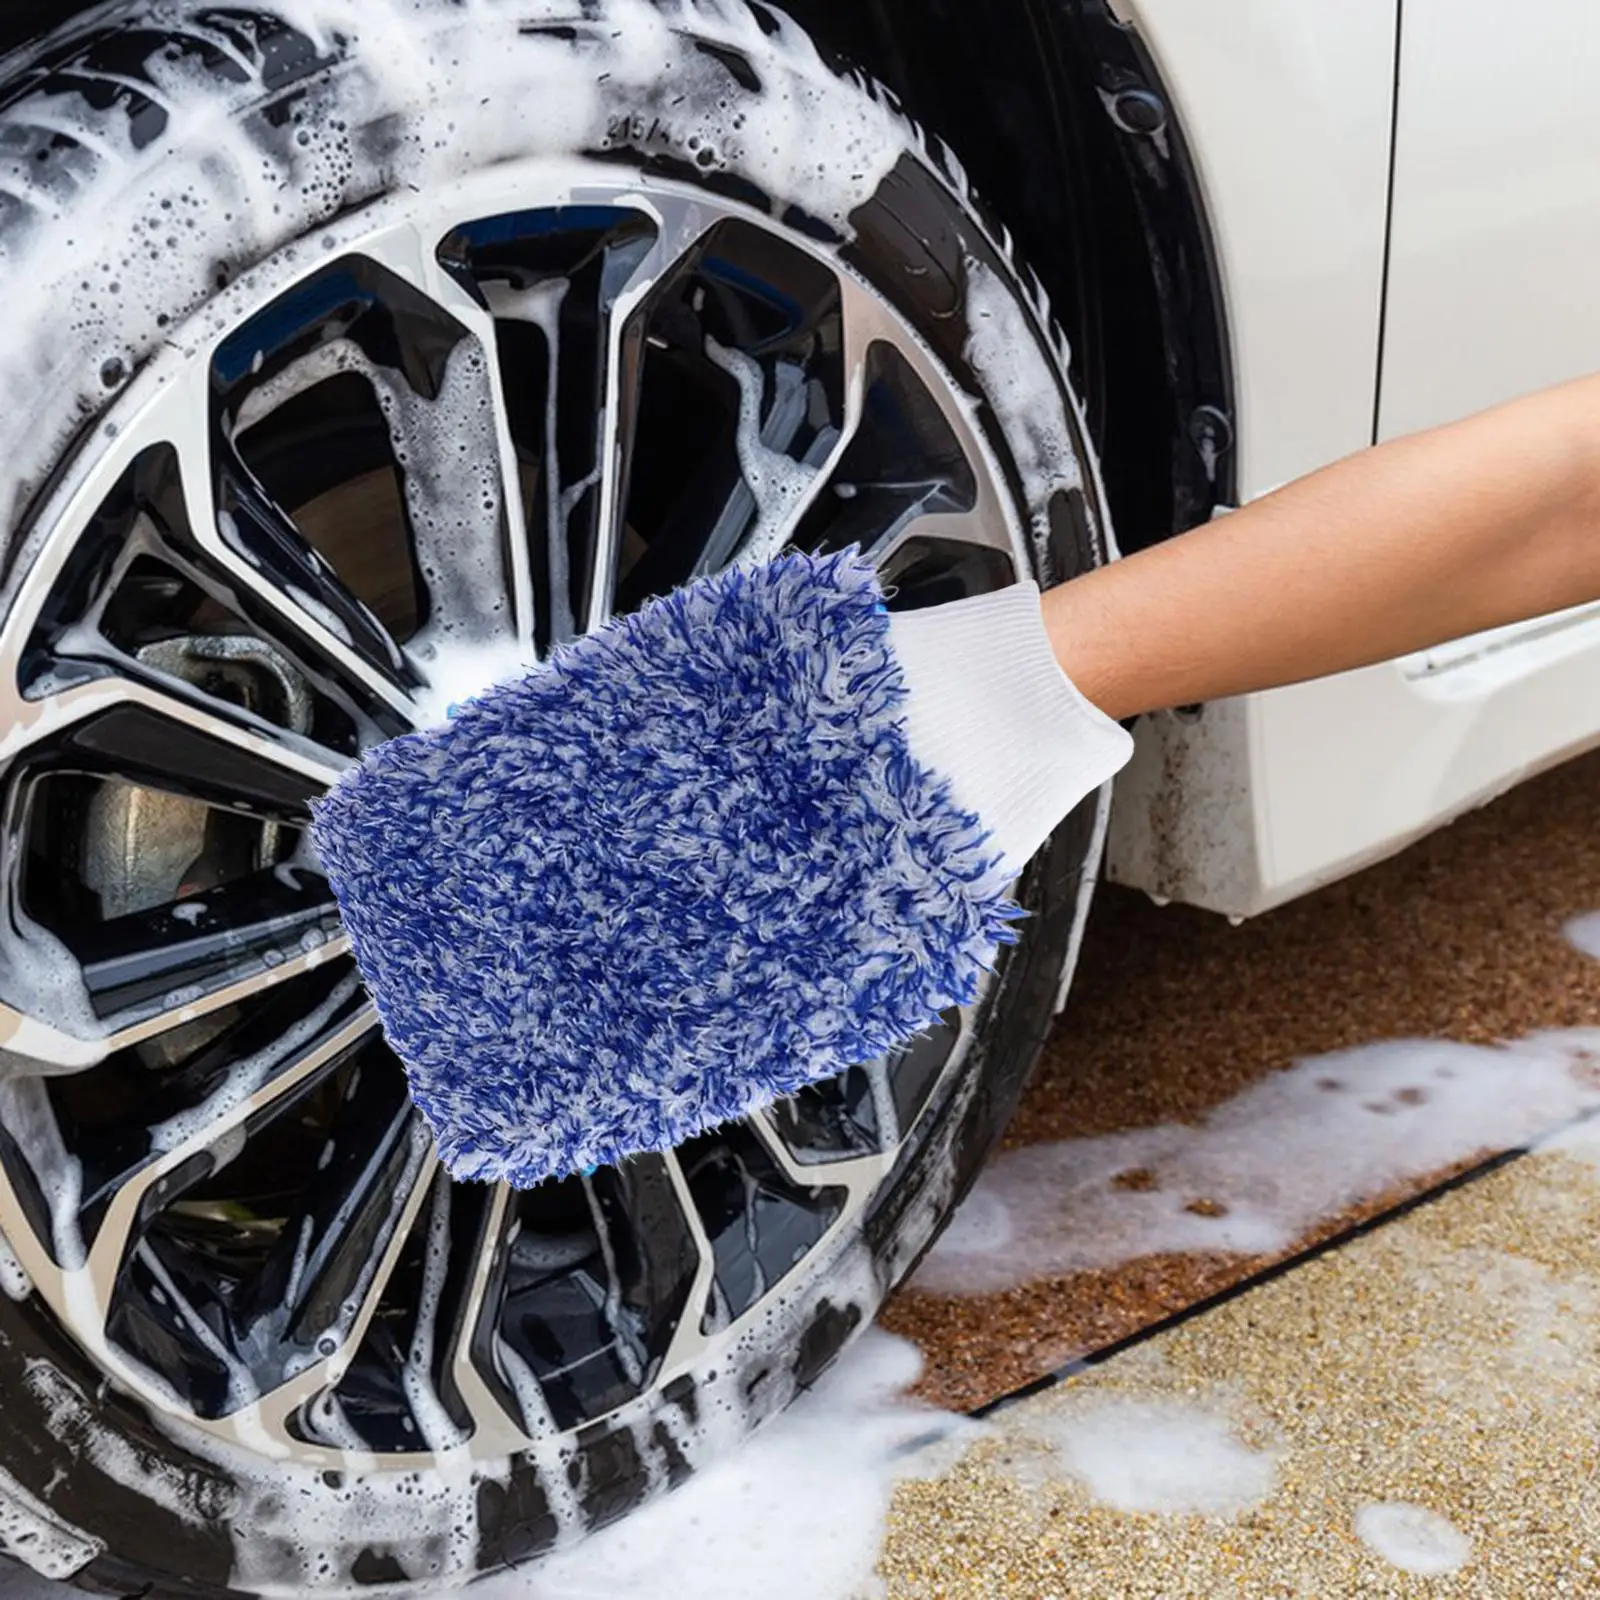 Car Wash Mitt Holds Tons of Sudsy Water Effective Washing Microfiber Lint Free Absorbent Washing Glove for Motorcycles Cars